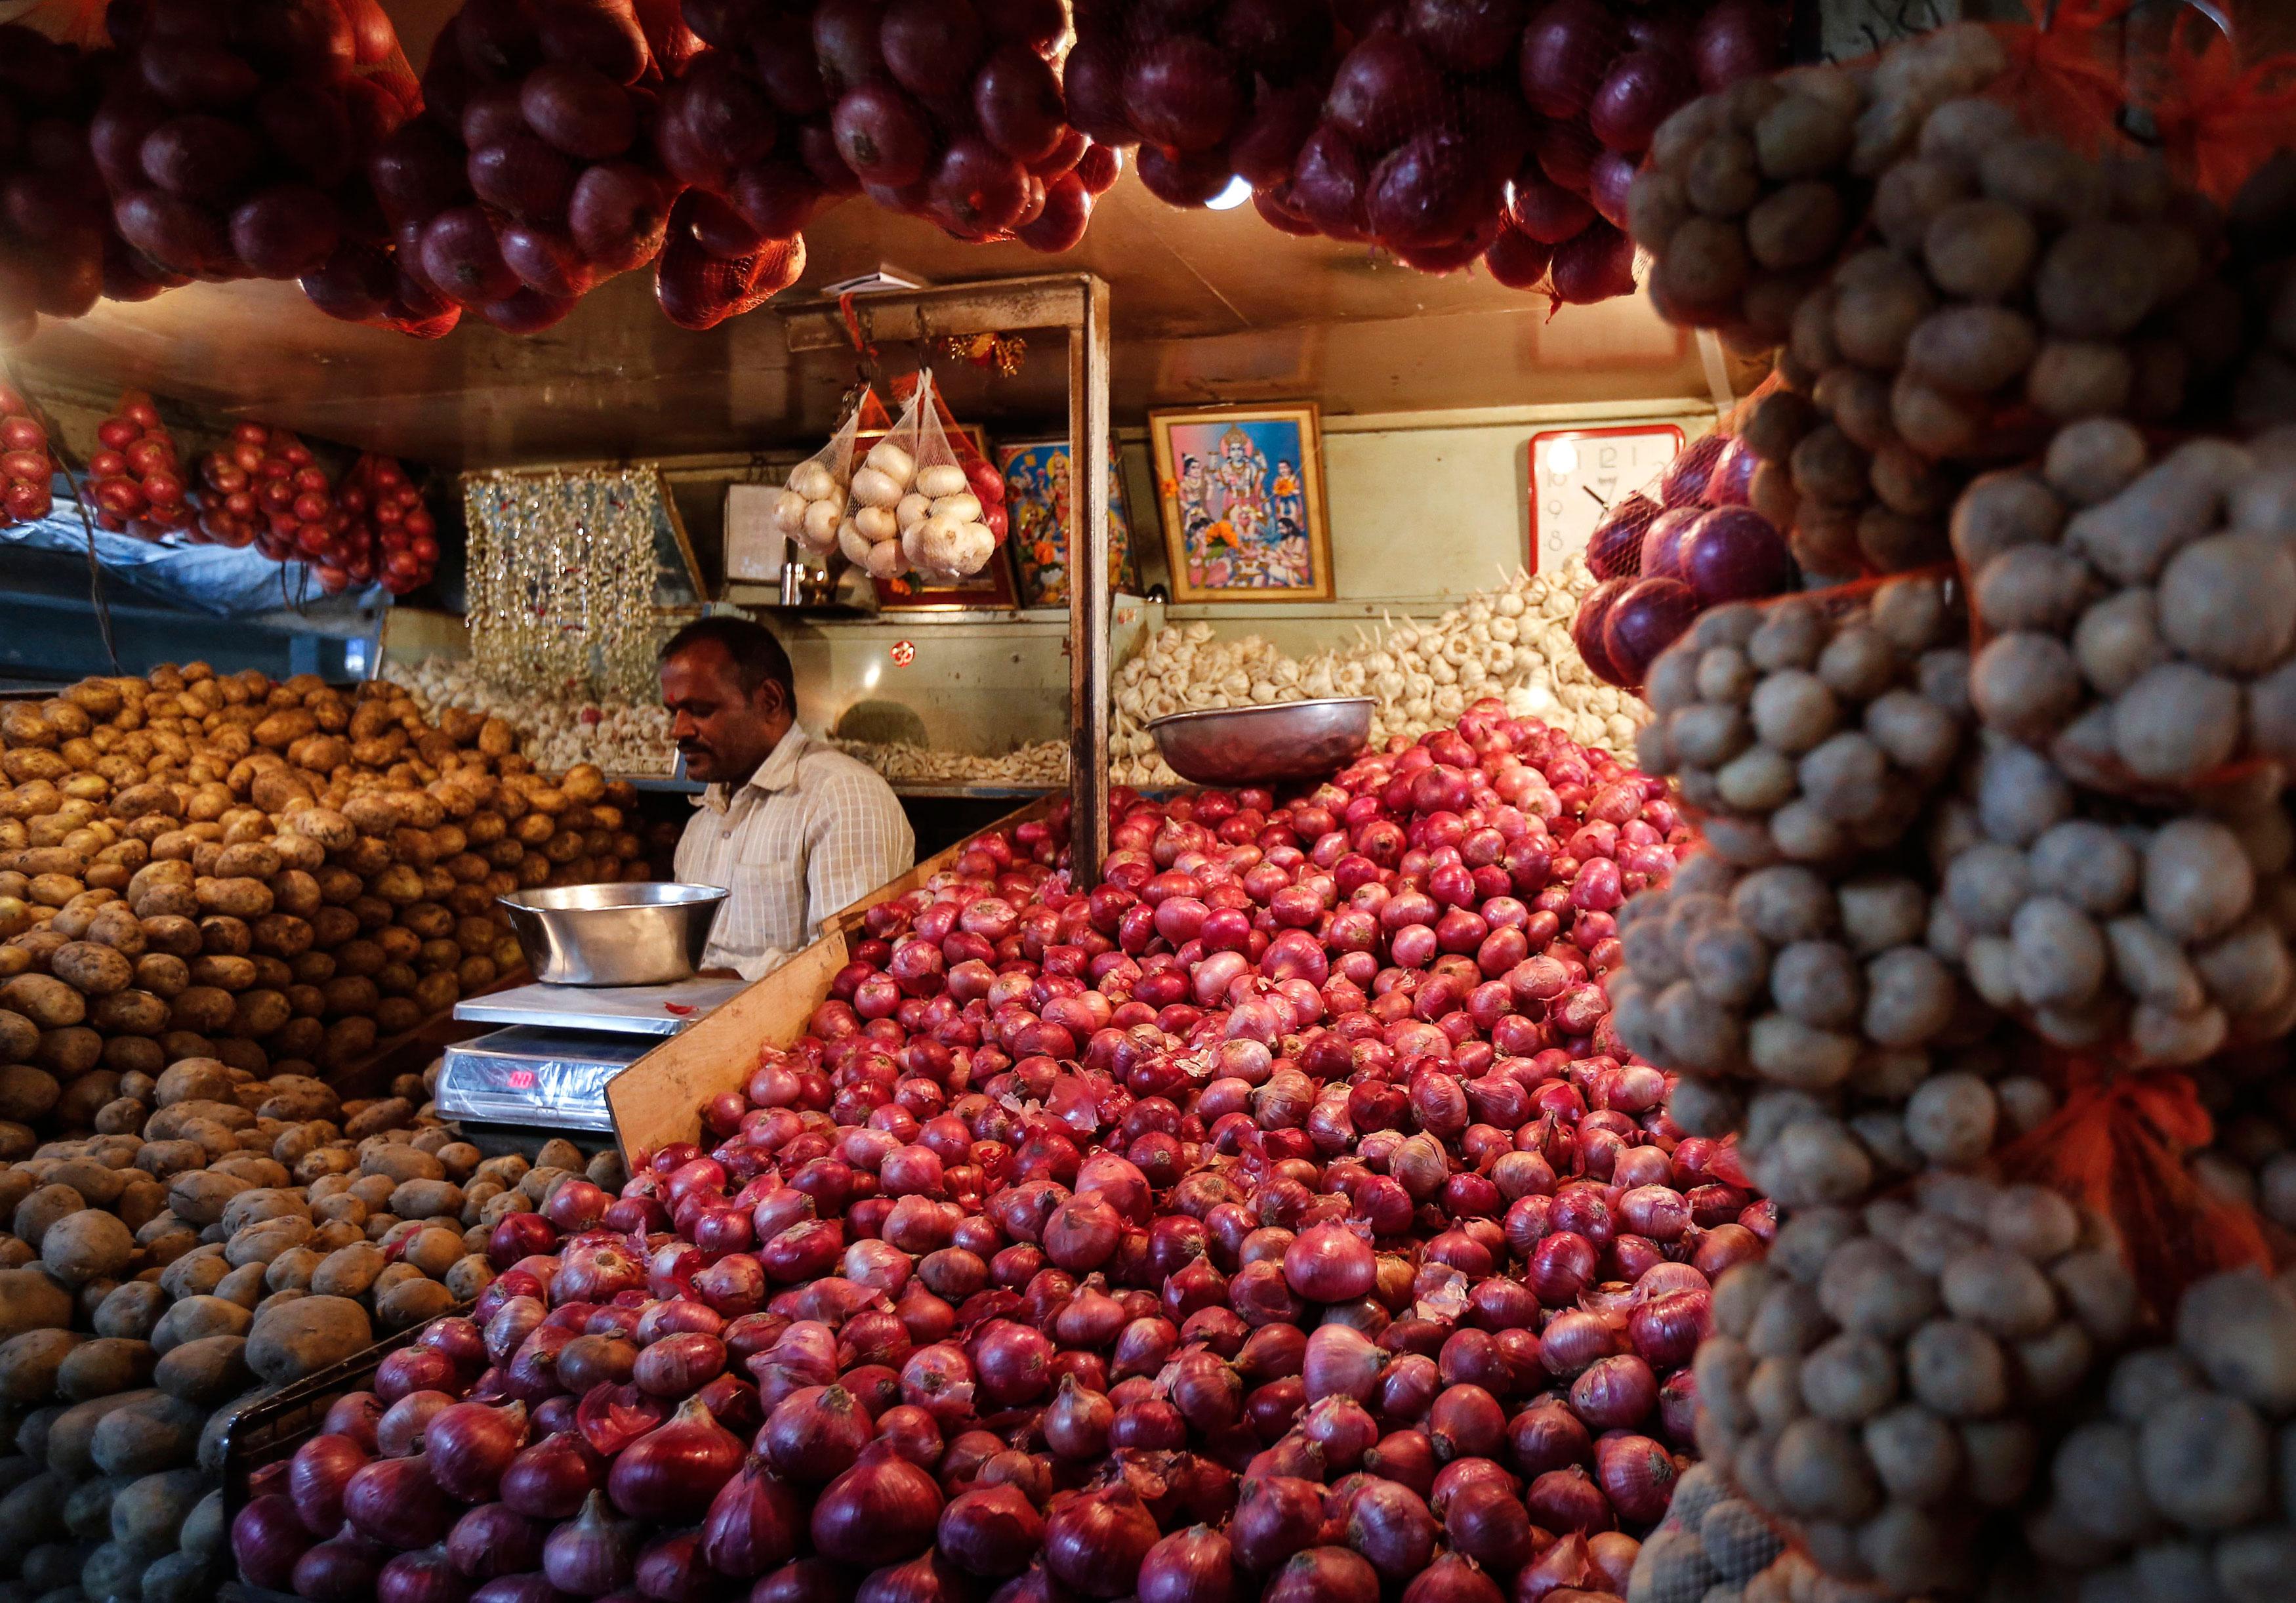 Wholesale inflation inches up, but hovers around 0%